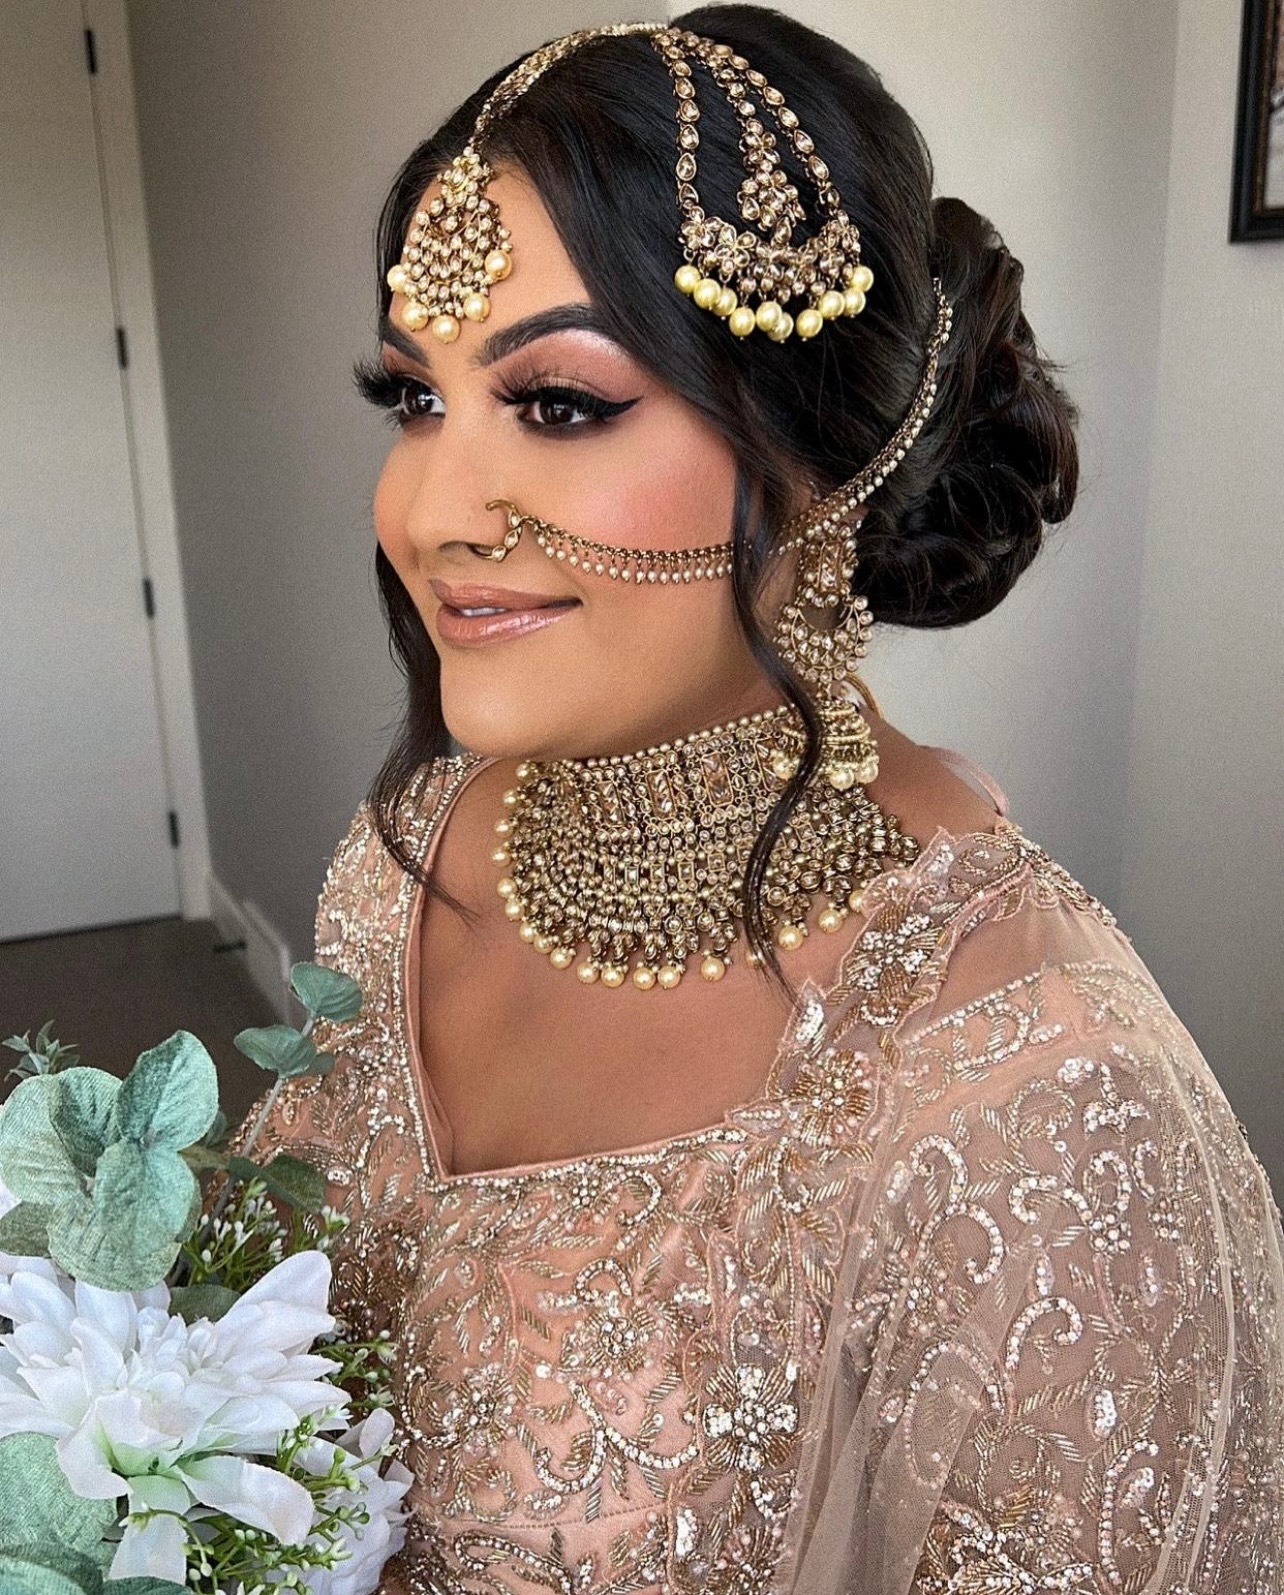 Is South Asian Bridal Makeup Too